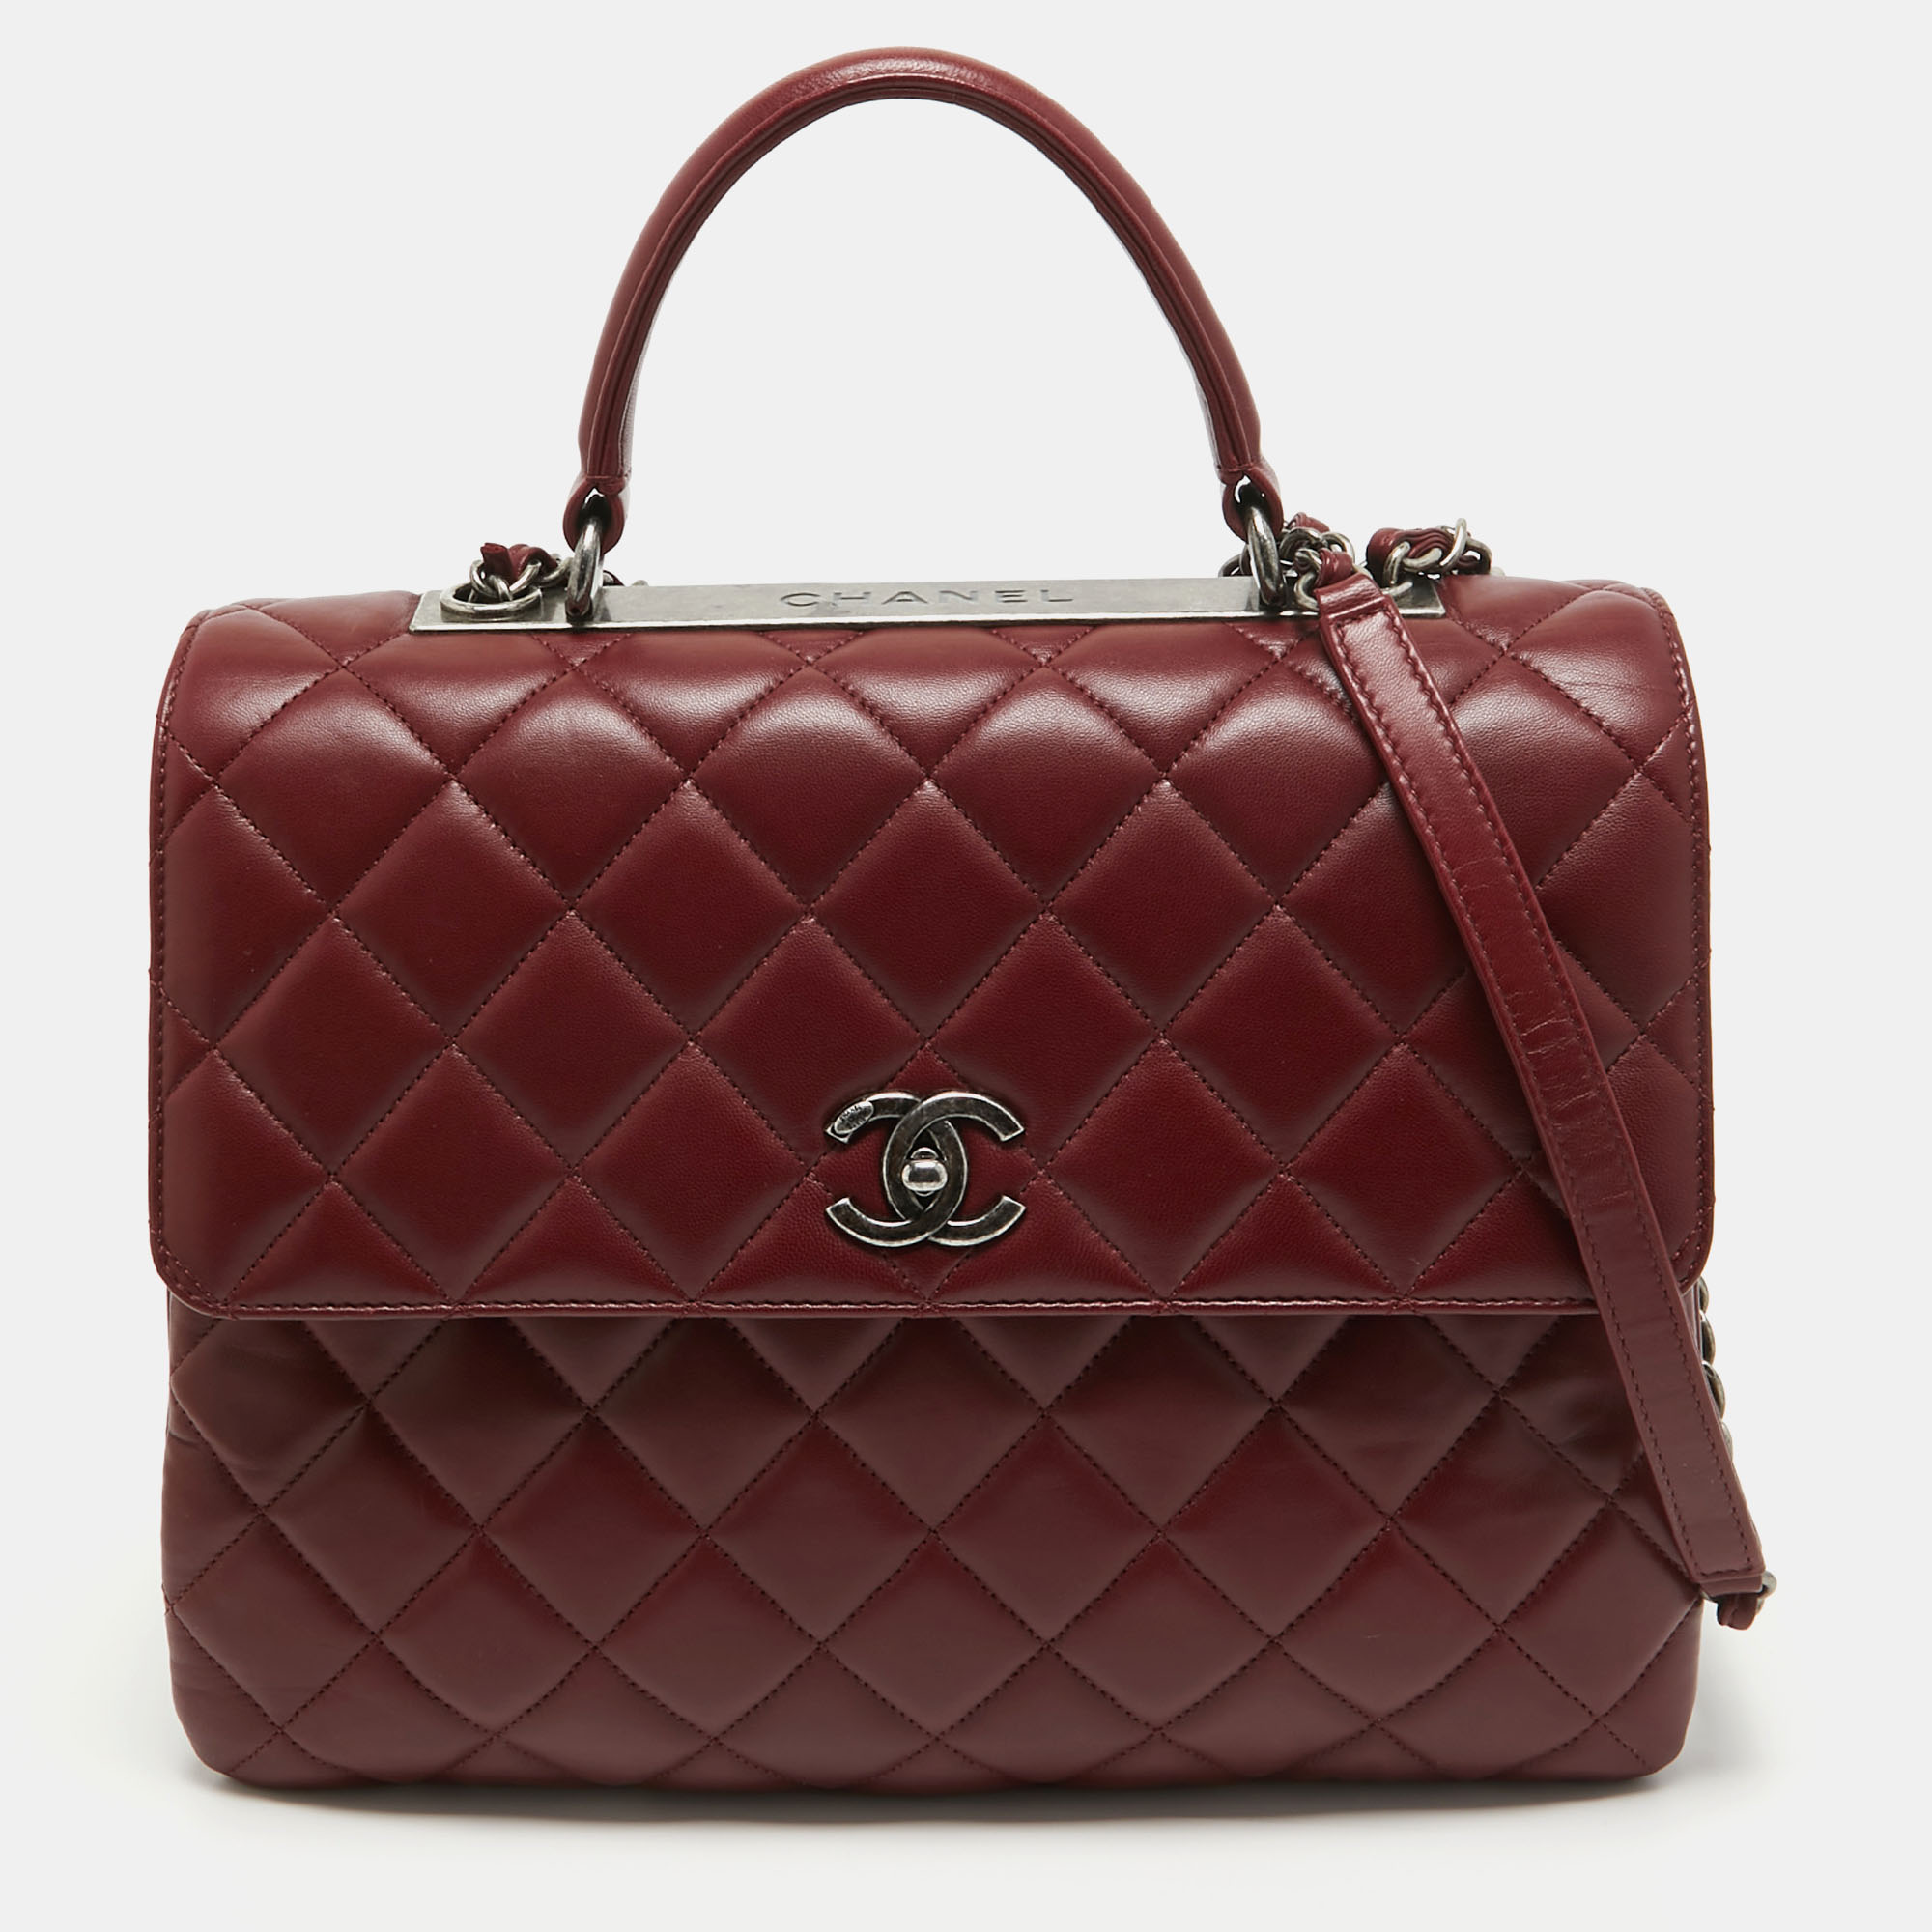 Chanel dark red quilted leather large trendy cc top handle bag